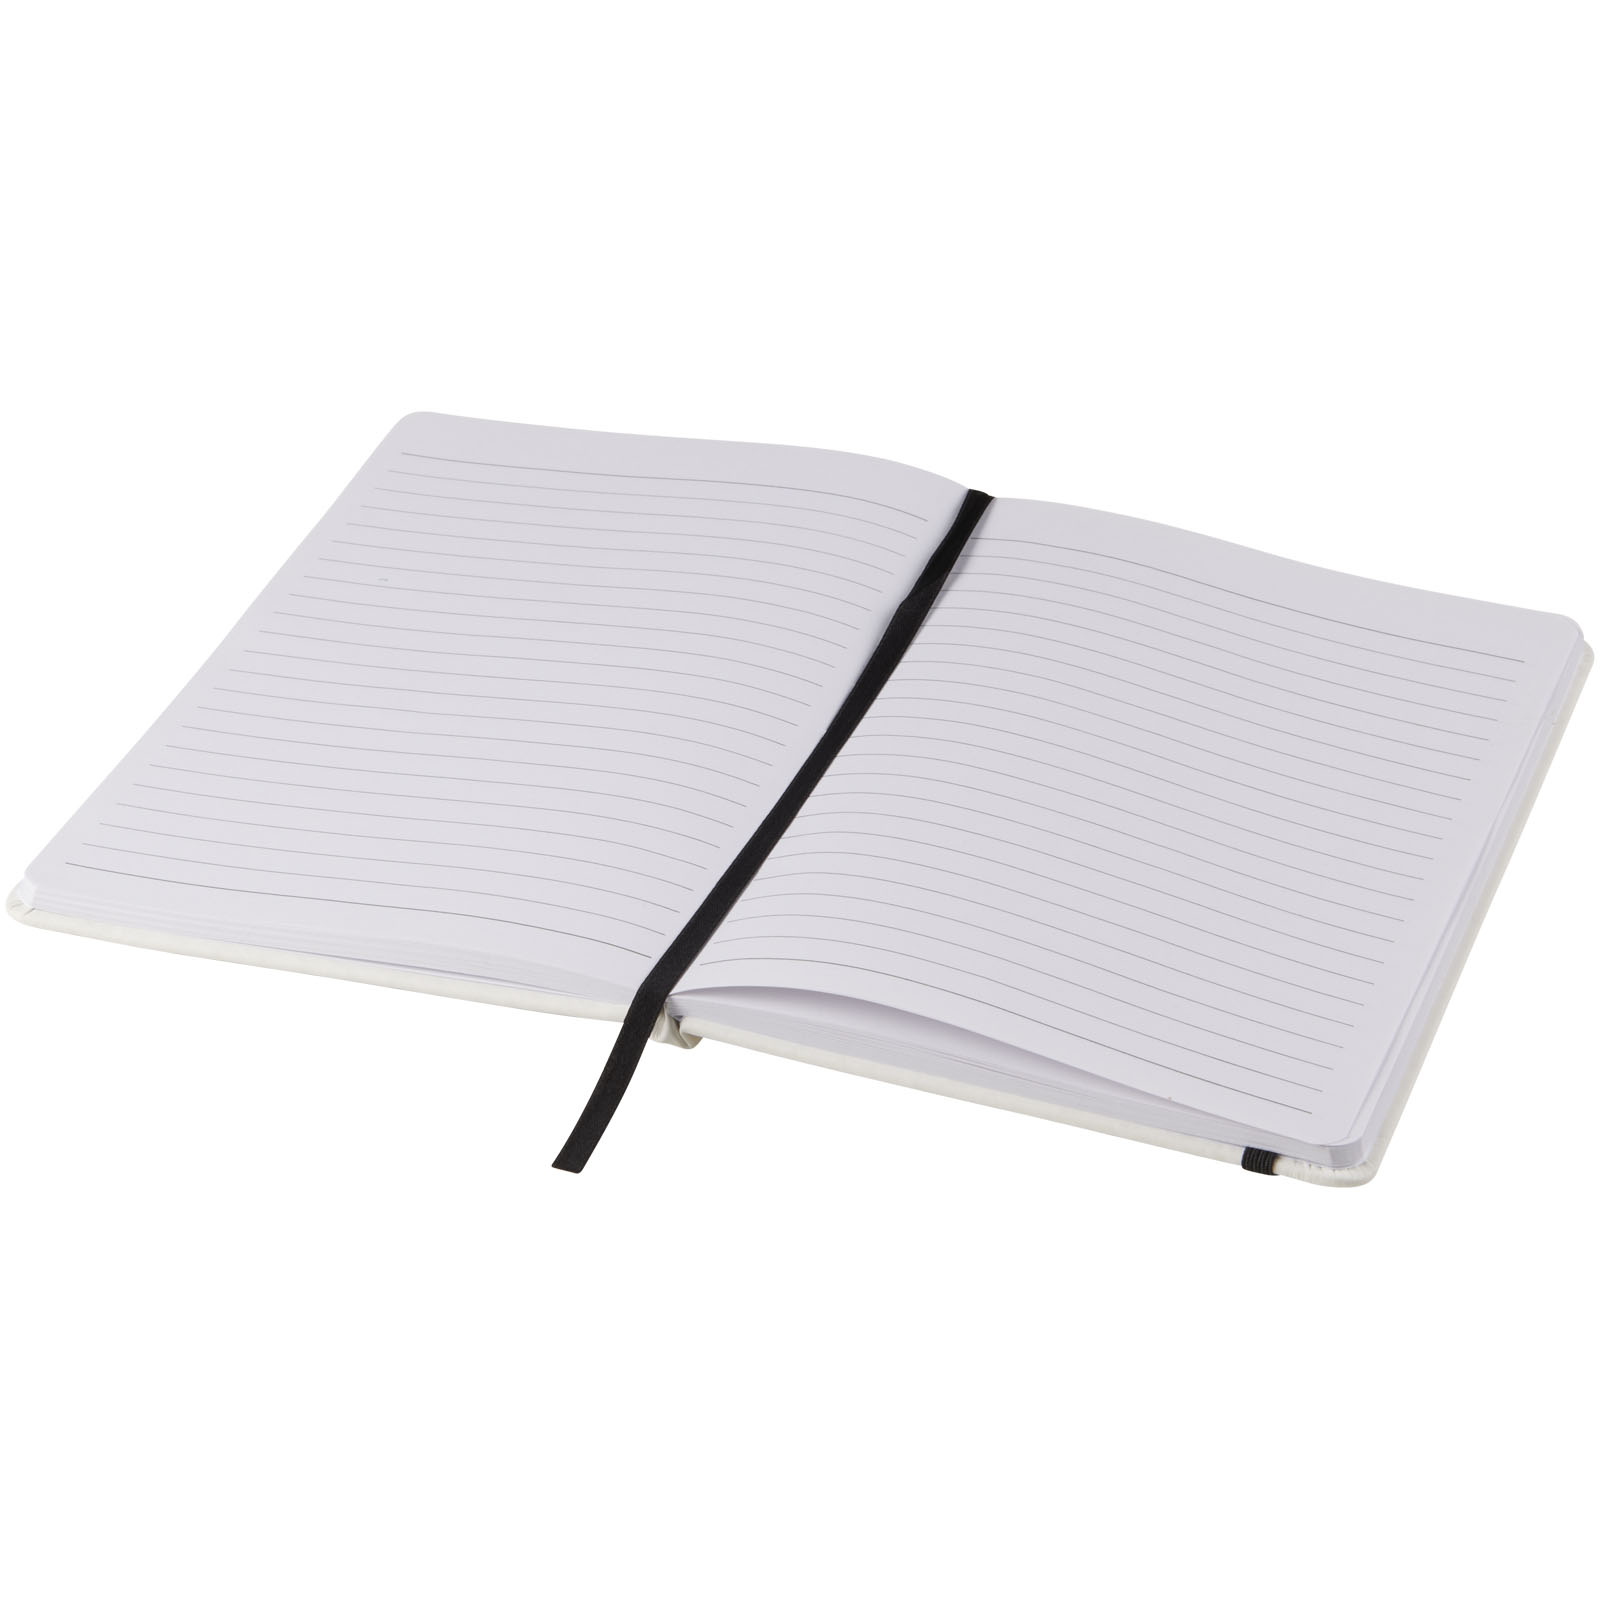 Advertising Hard cover notebooks - Spectrum A5 white notebook with coloured strap - 3